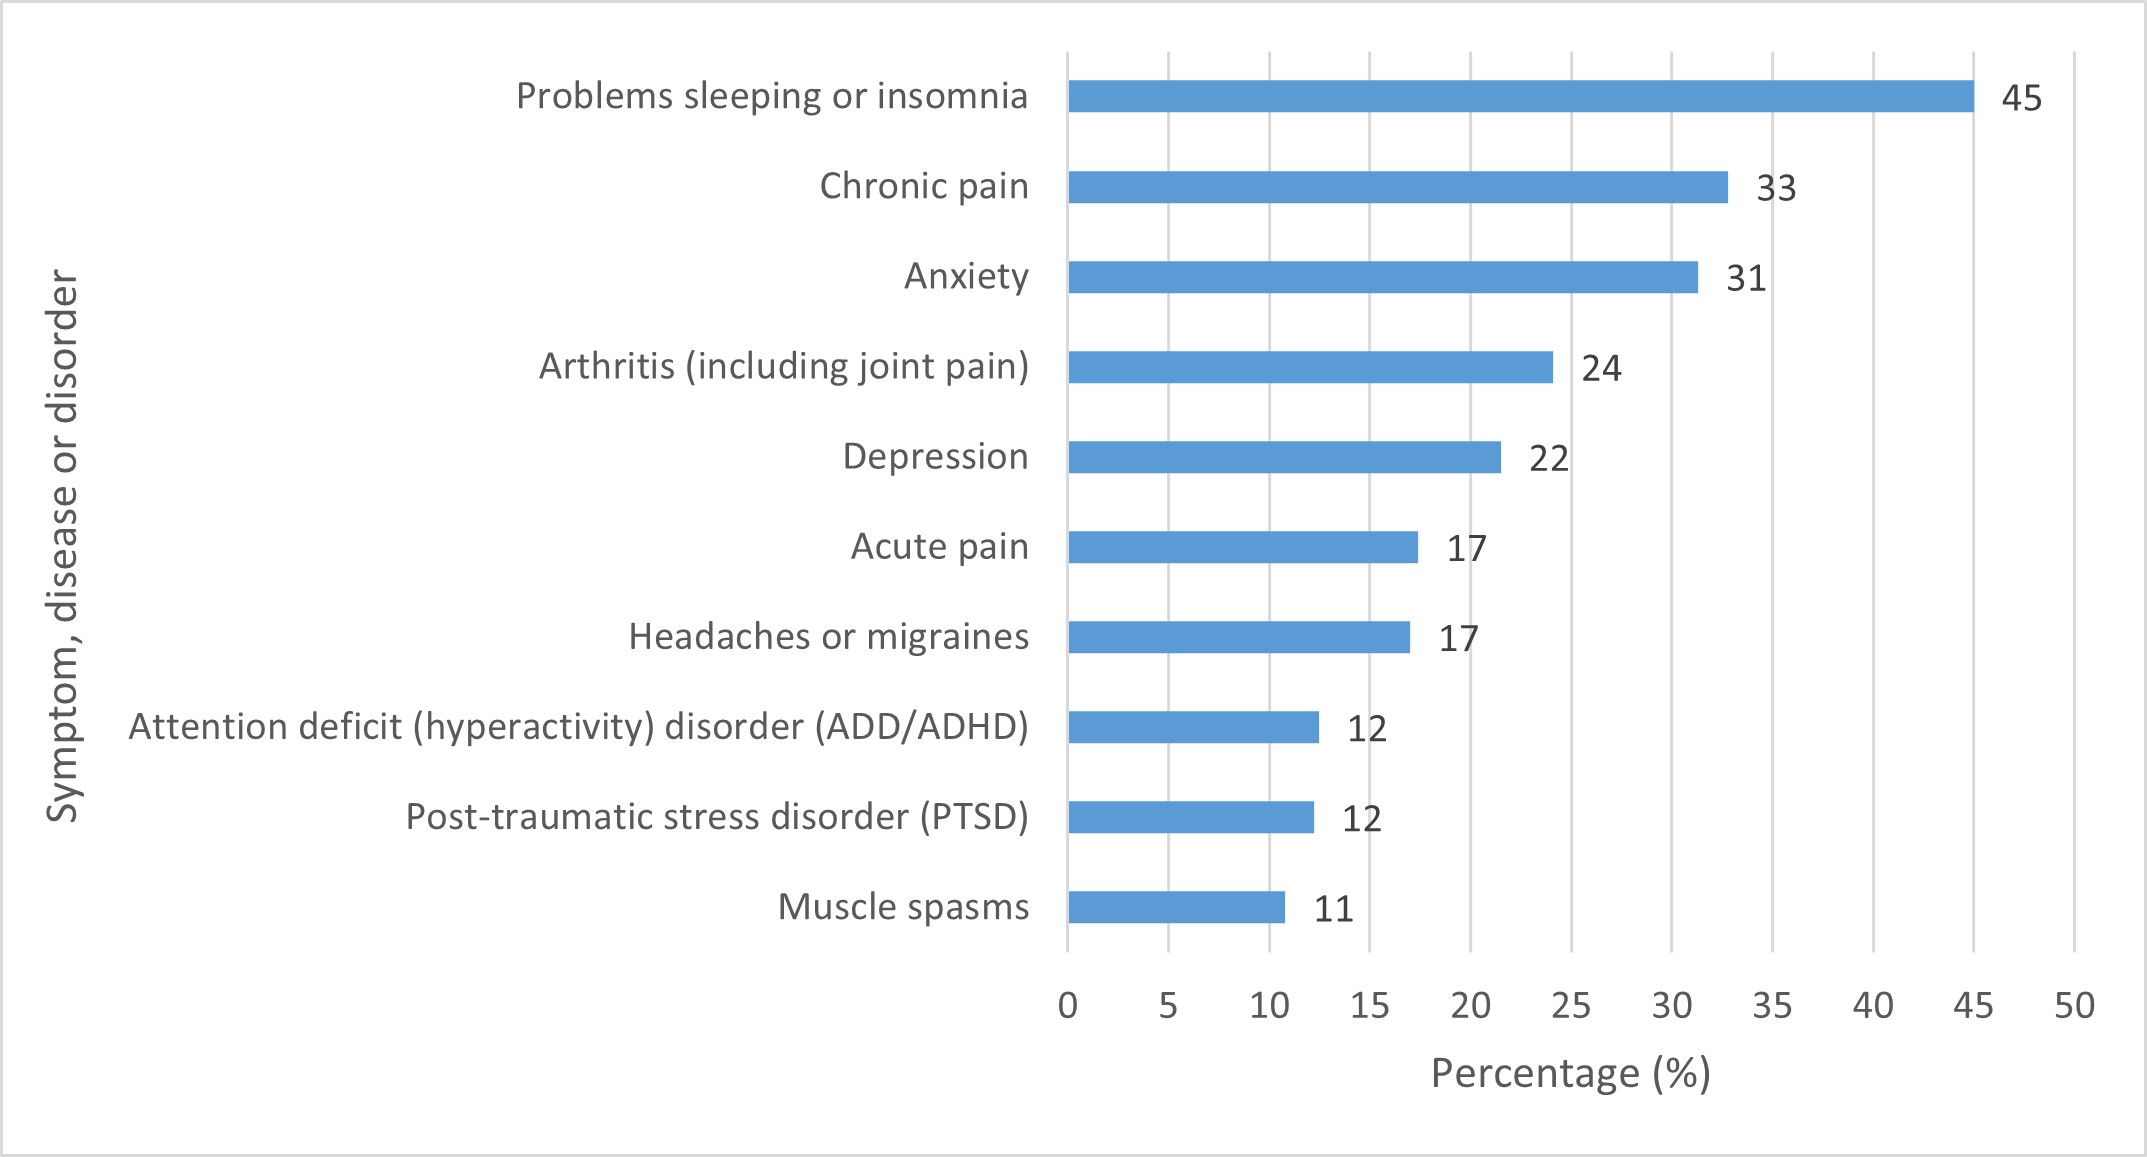 Figure 26: : Symptoms, diseases and disorders treated by cannabis, among people who used cannabis for medical purposes in the past 12 months. Text description follows.